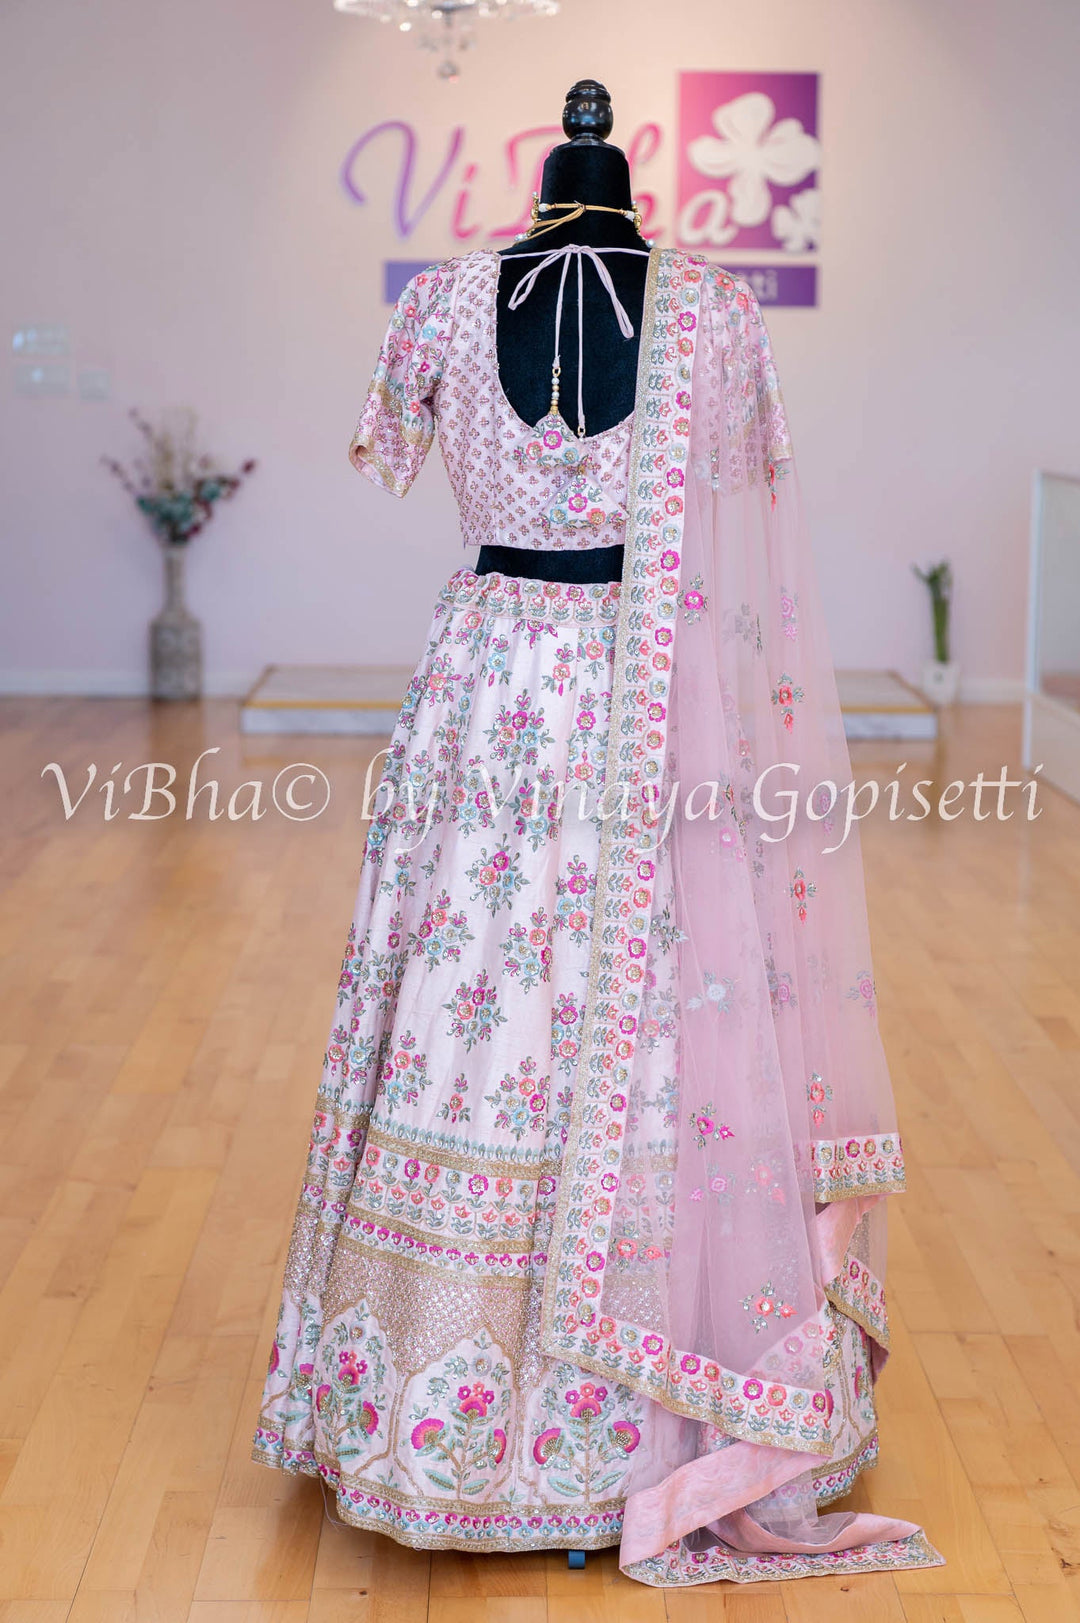 Accessories & Jewelry - Light Pink Raw Silk Lehenga And Blouse With Fully Hand Embroidered In Floral Motifs And Borders With Net Dupatta